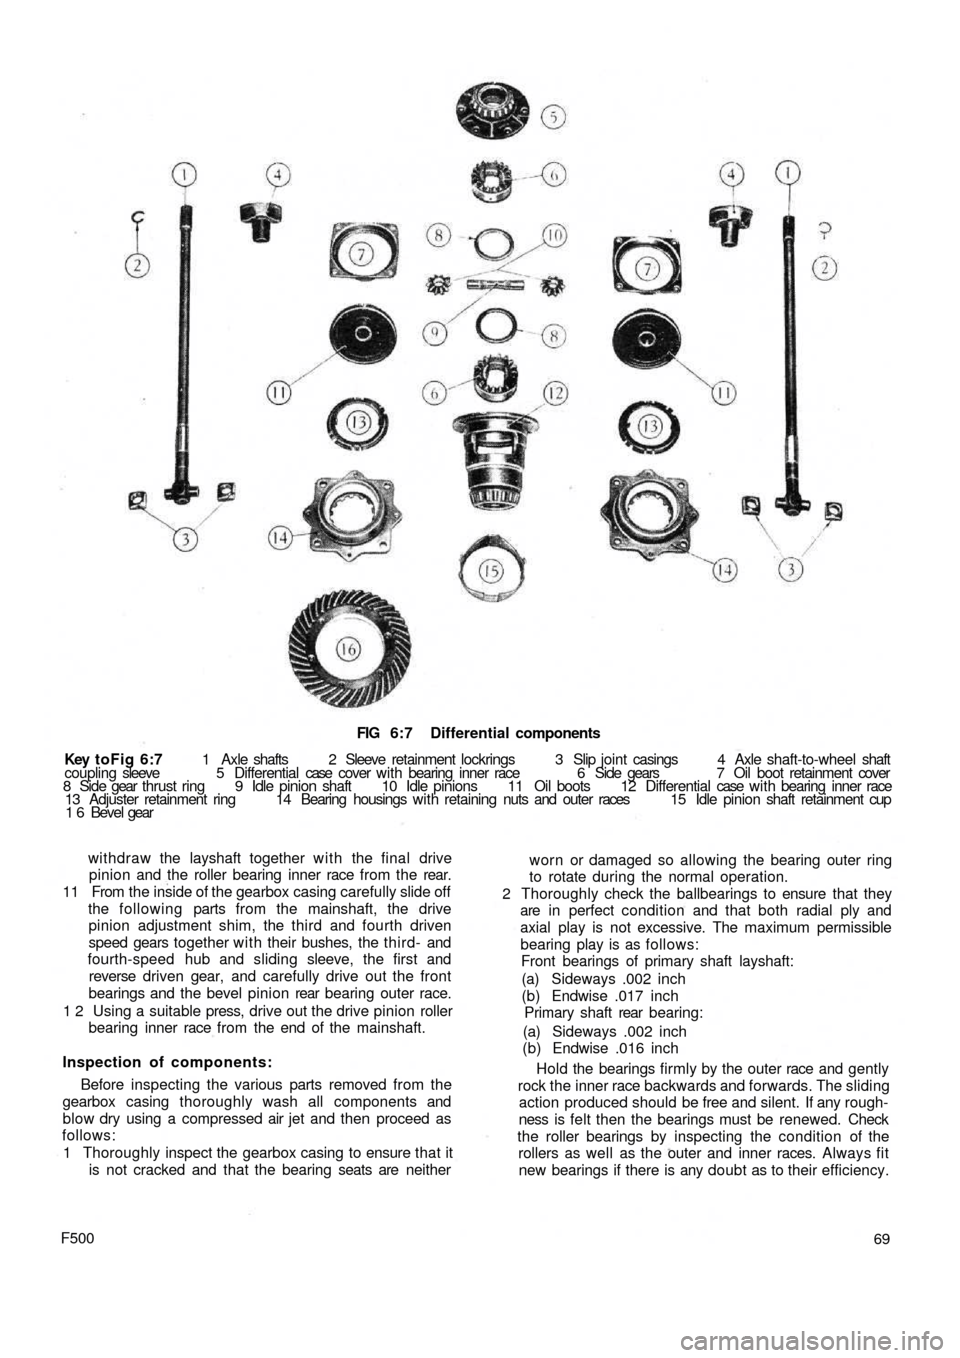 FIAT 500 1965 1.G Workshop Manual FIG 6:7  Differential components
Key toFig  6:7 1  Axle  shafts  2  Sleeve  retainment  lockrings   3   Slip  joint casings  4  Axle  shaft-to-wheel shaft
coupling sleeve  5  Differential case  cover 